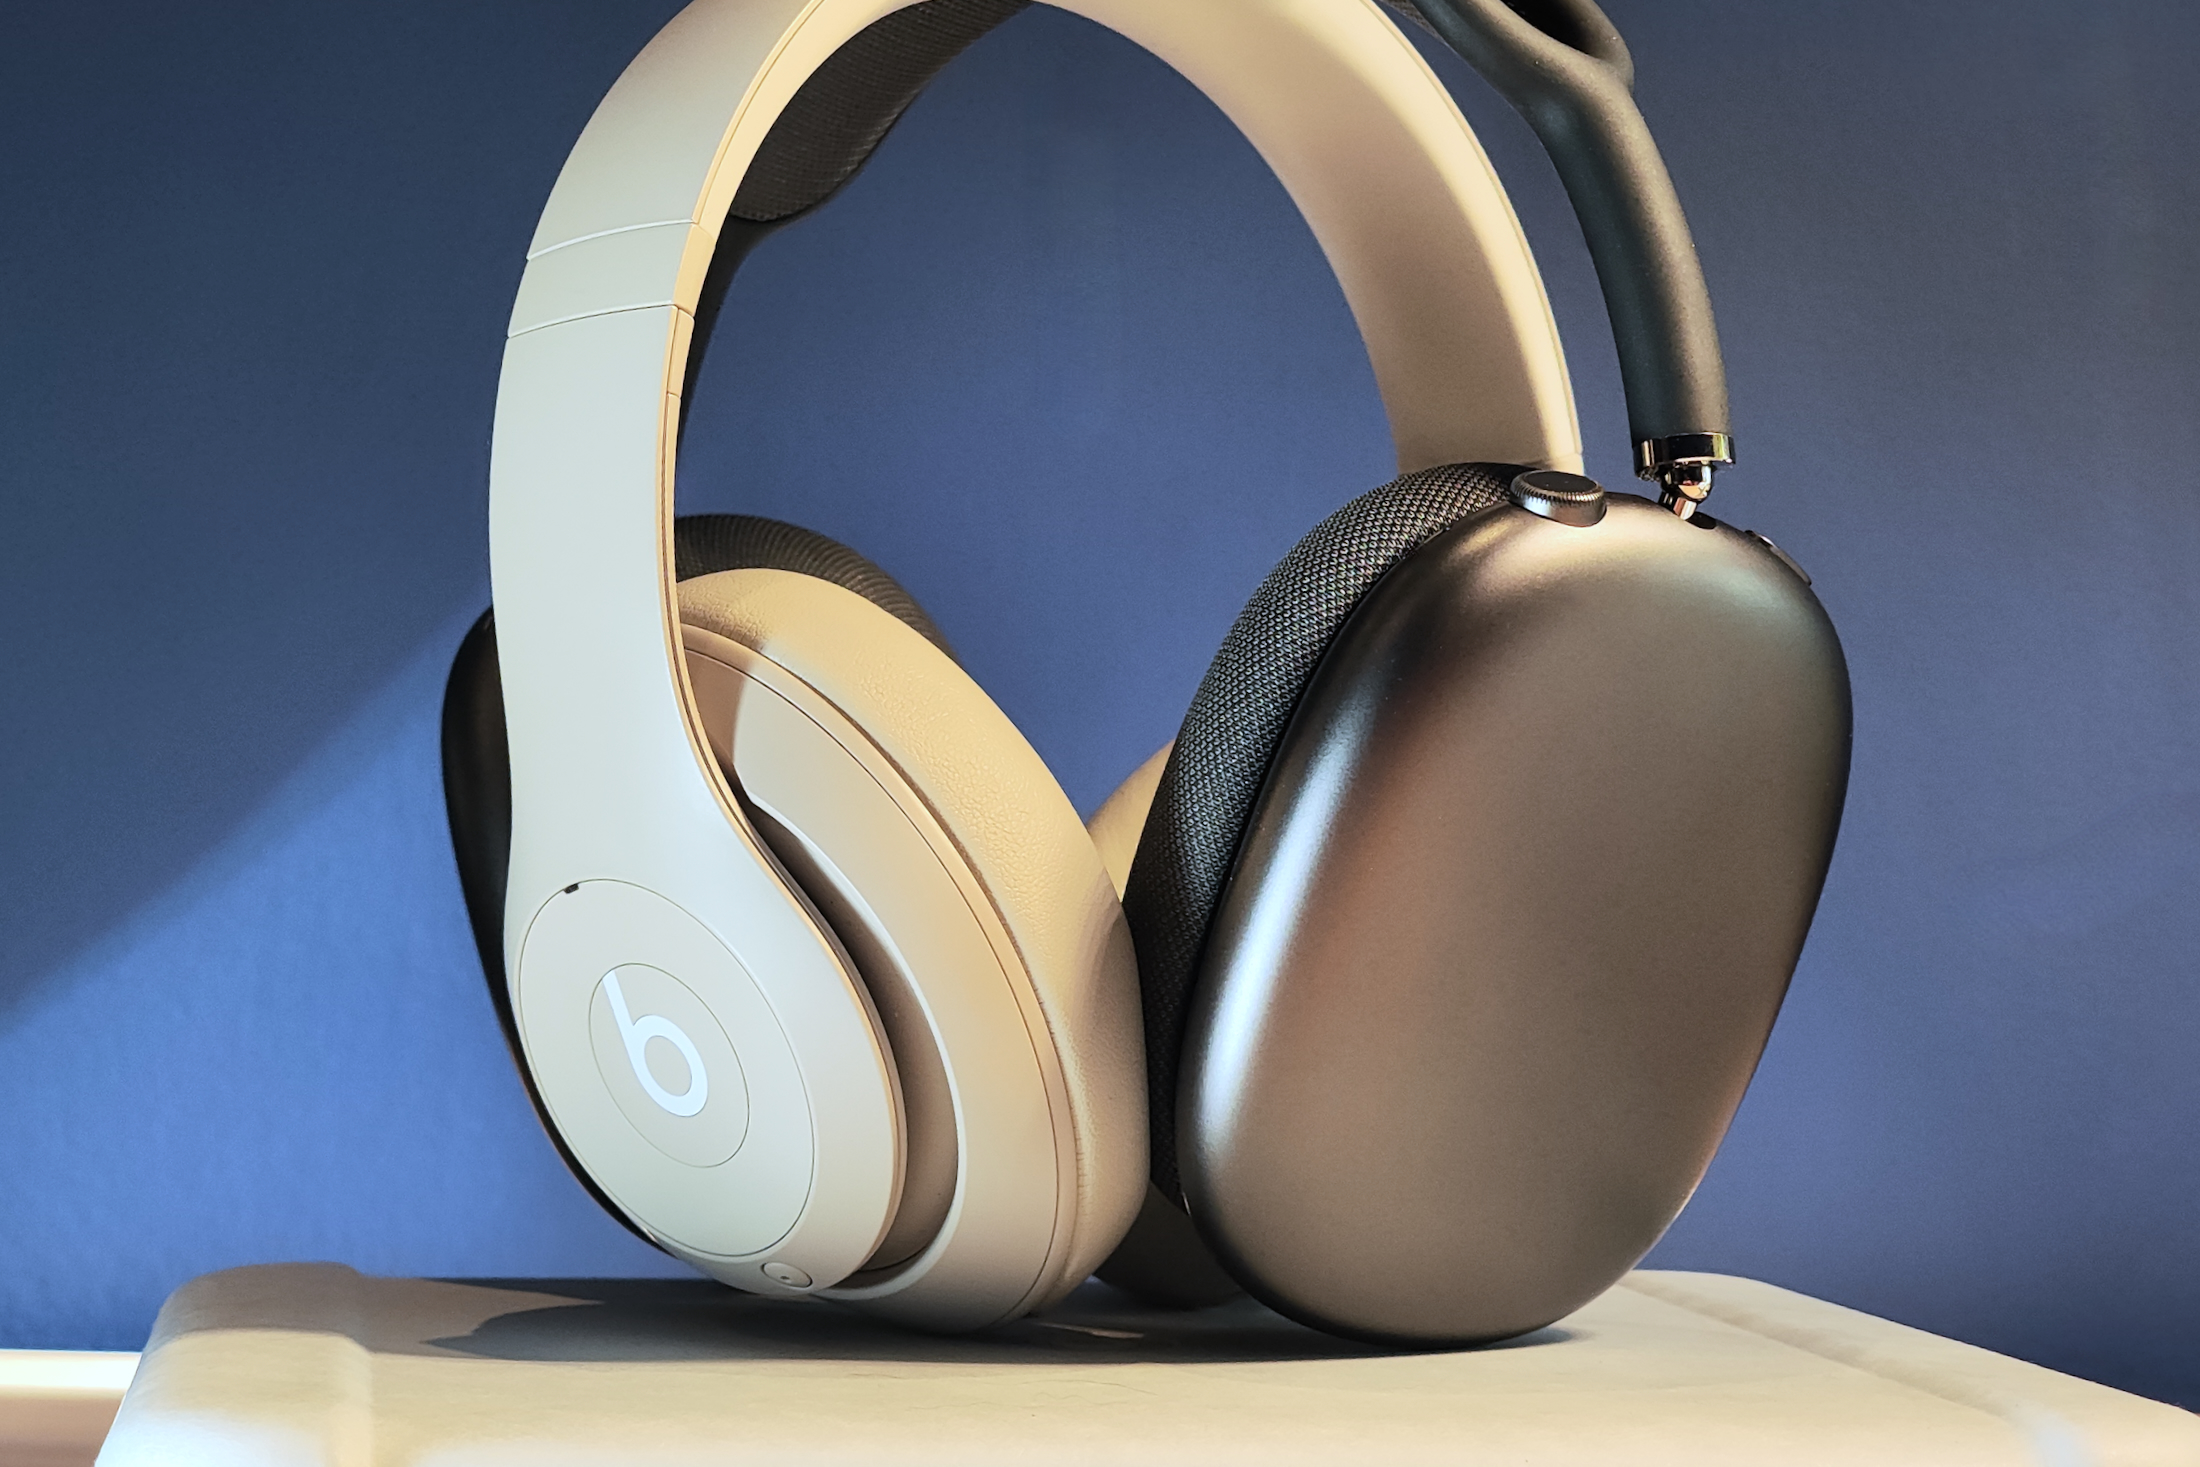 Beats Studio Pro headphones are still $170 off on  the day after  Prime Day